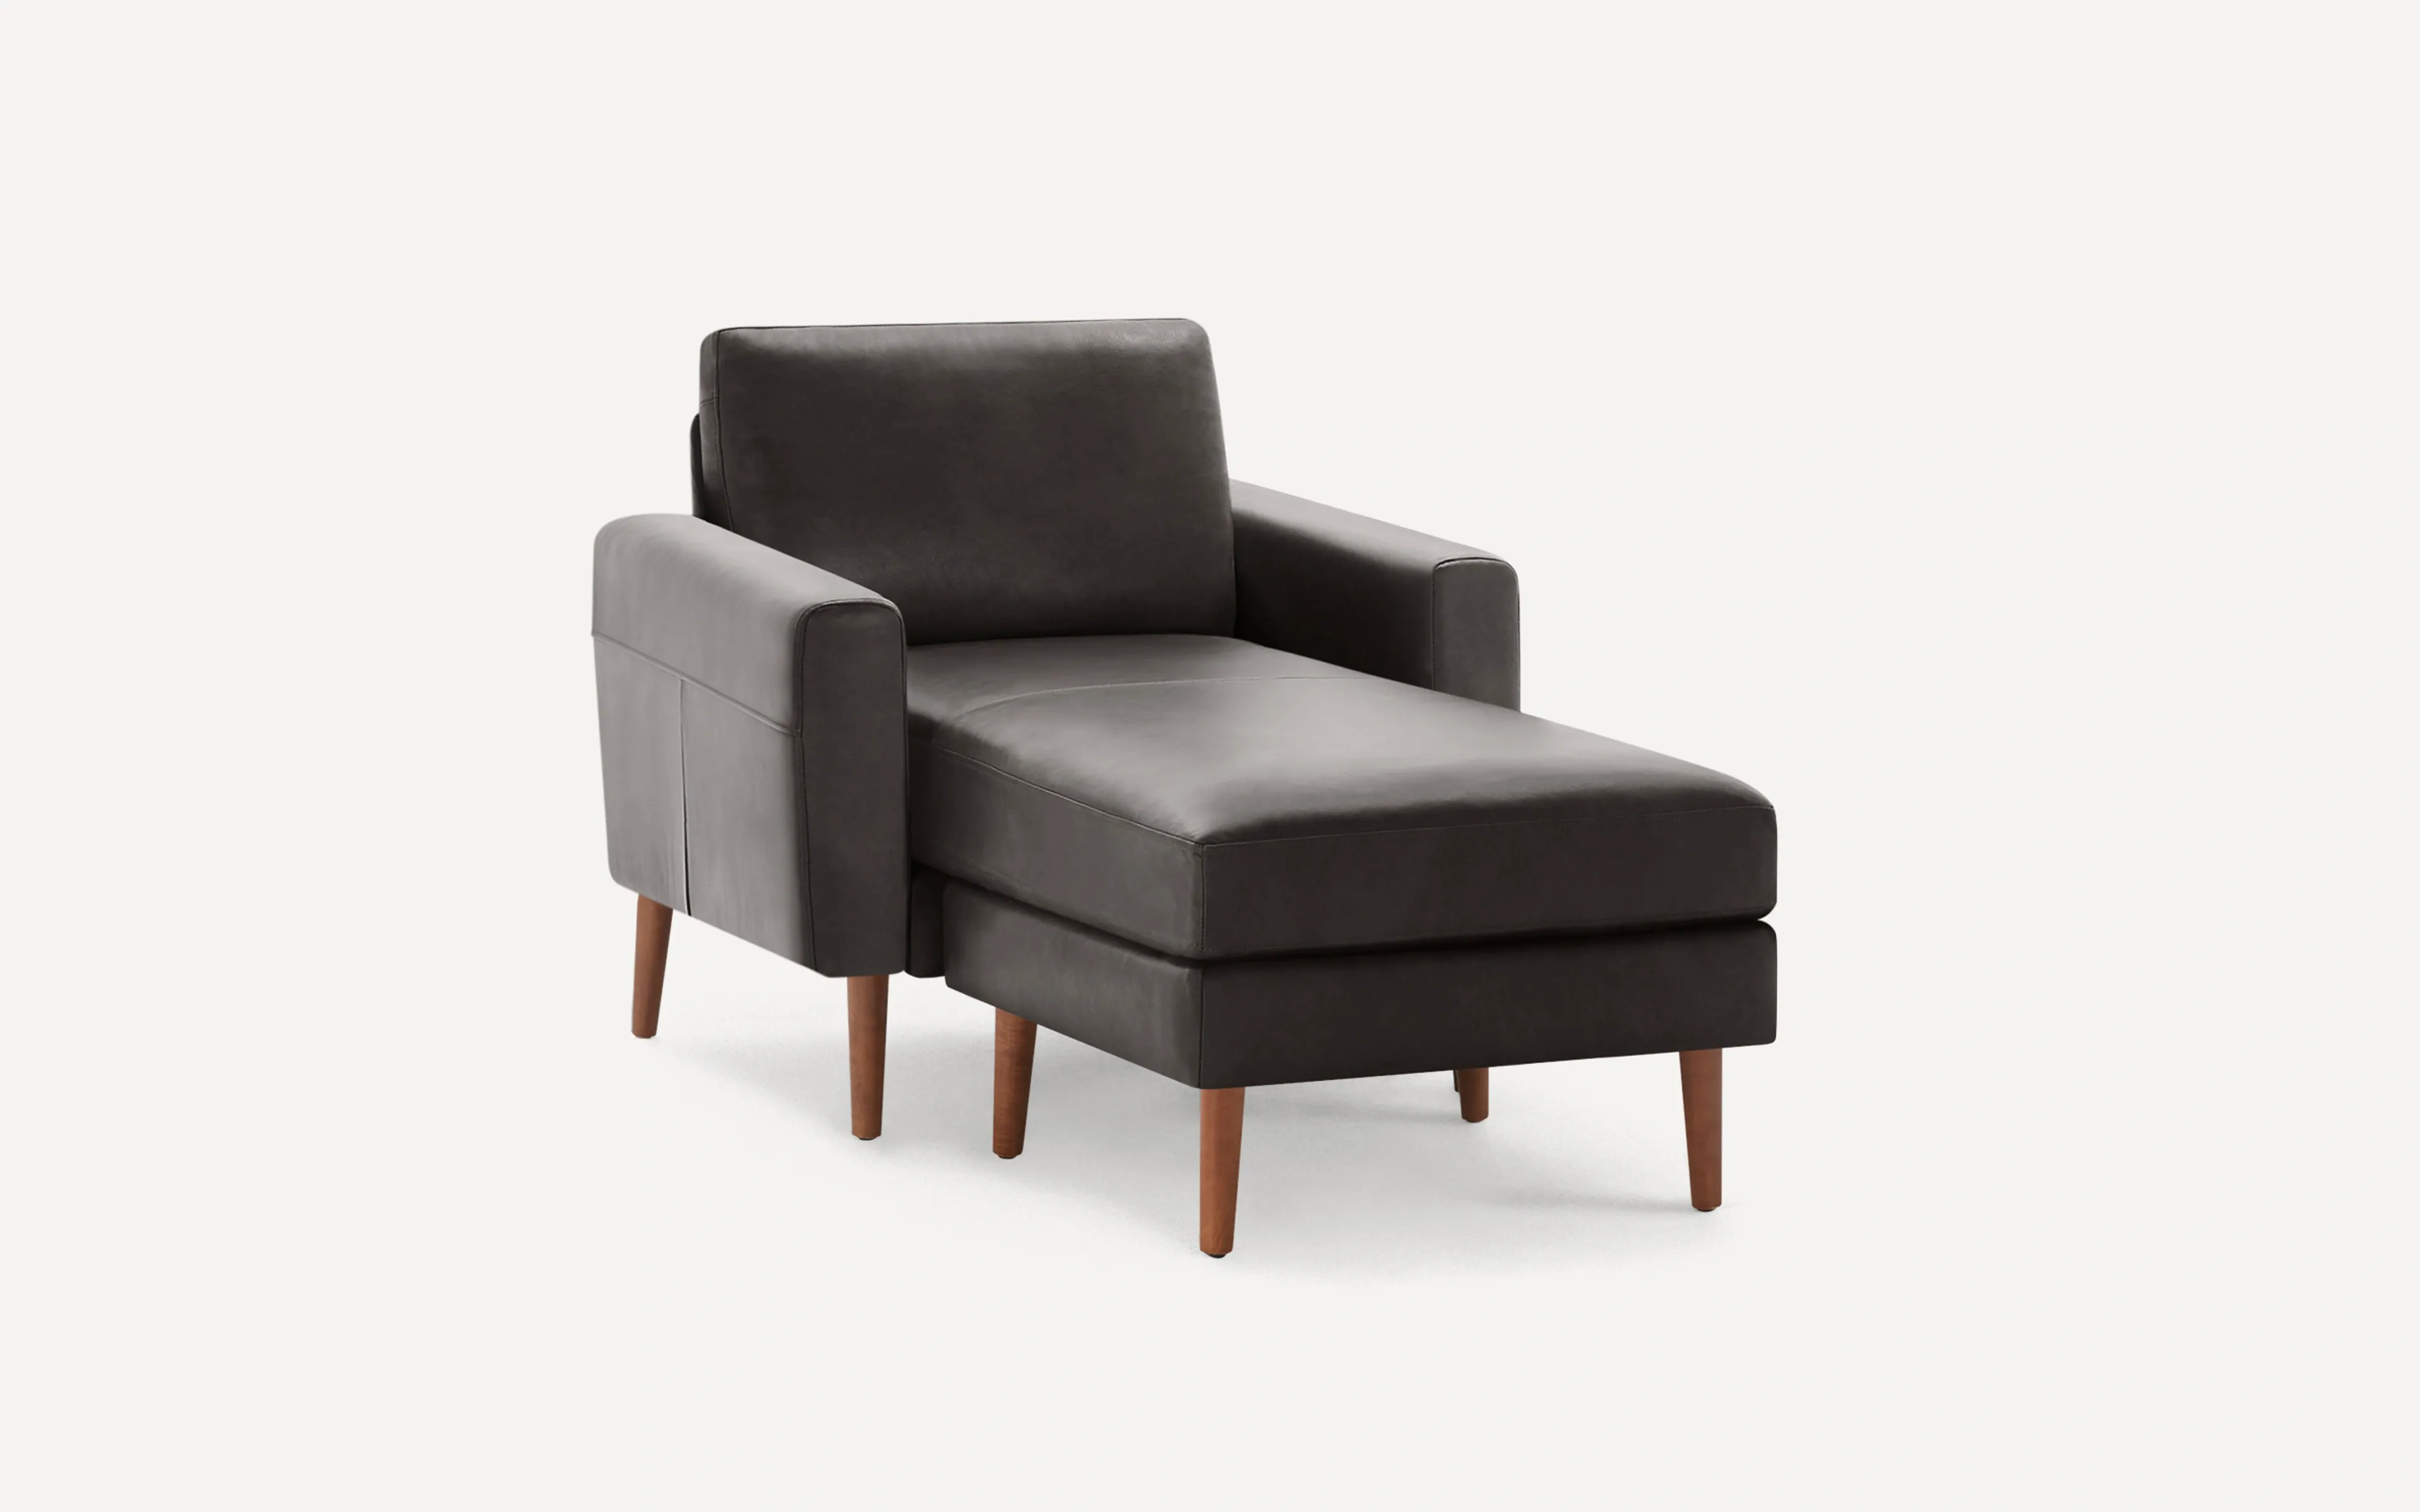 Original Nomad Chaise Armchair in Slate Leather